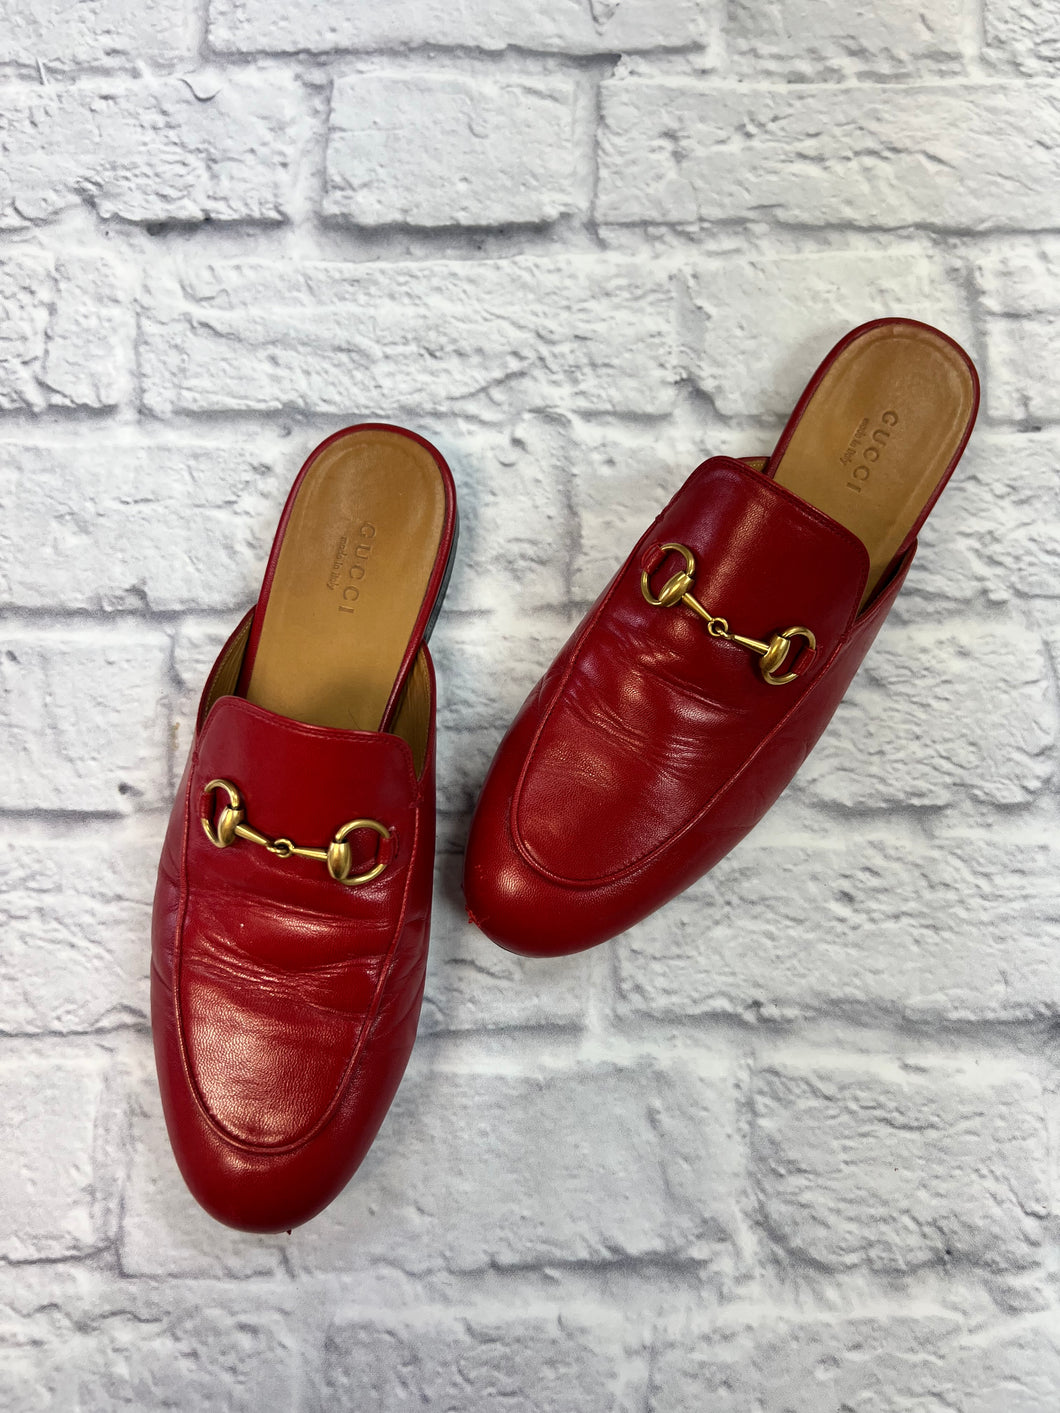 Gucci Red Princetown Mules, Size 37.5